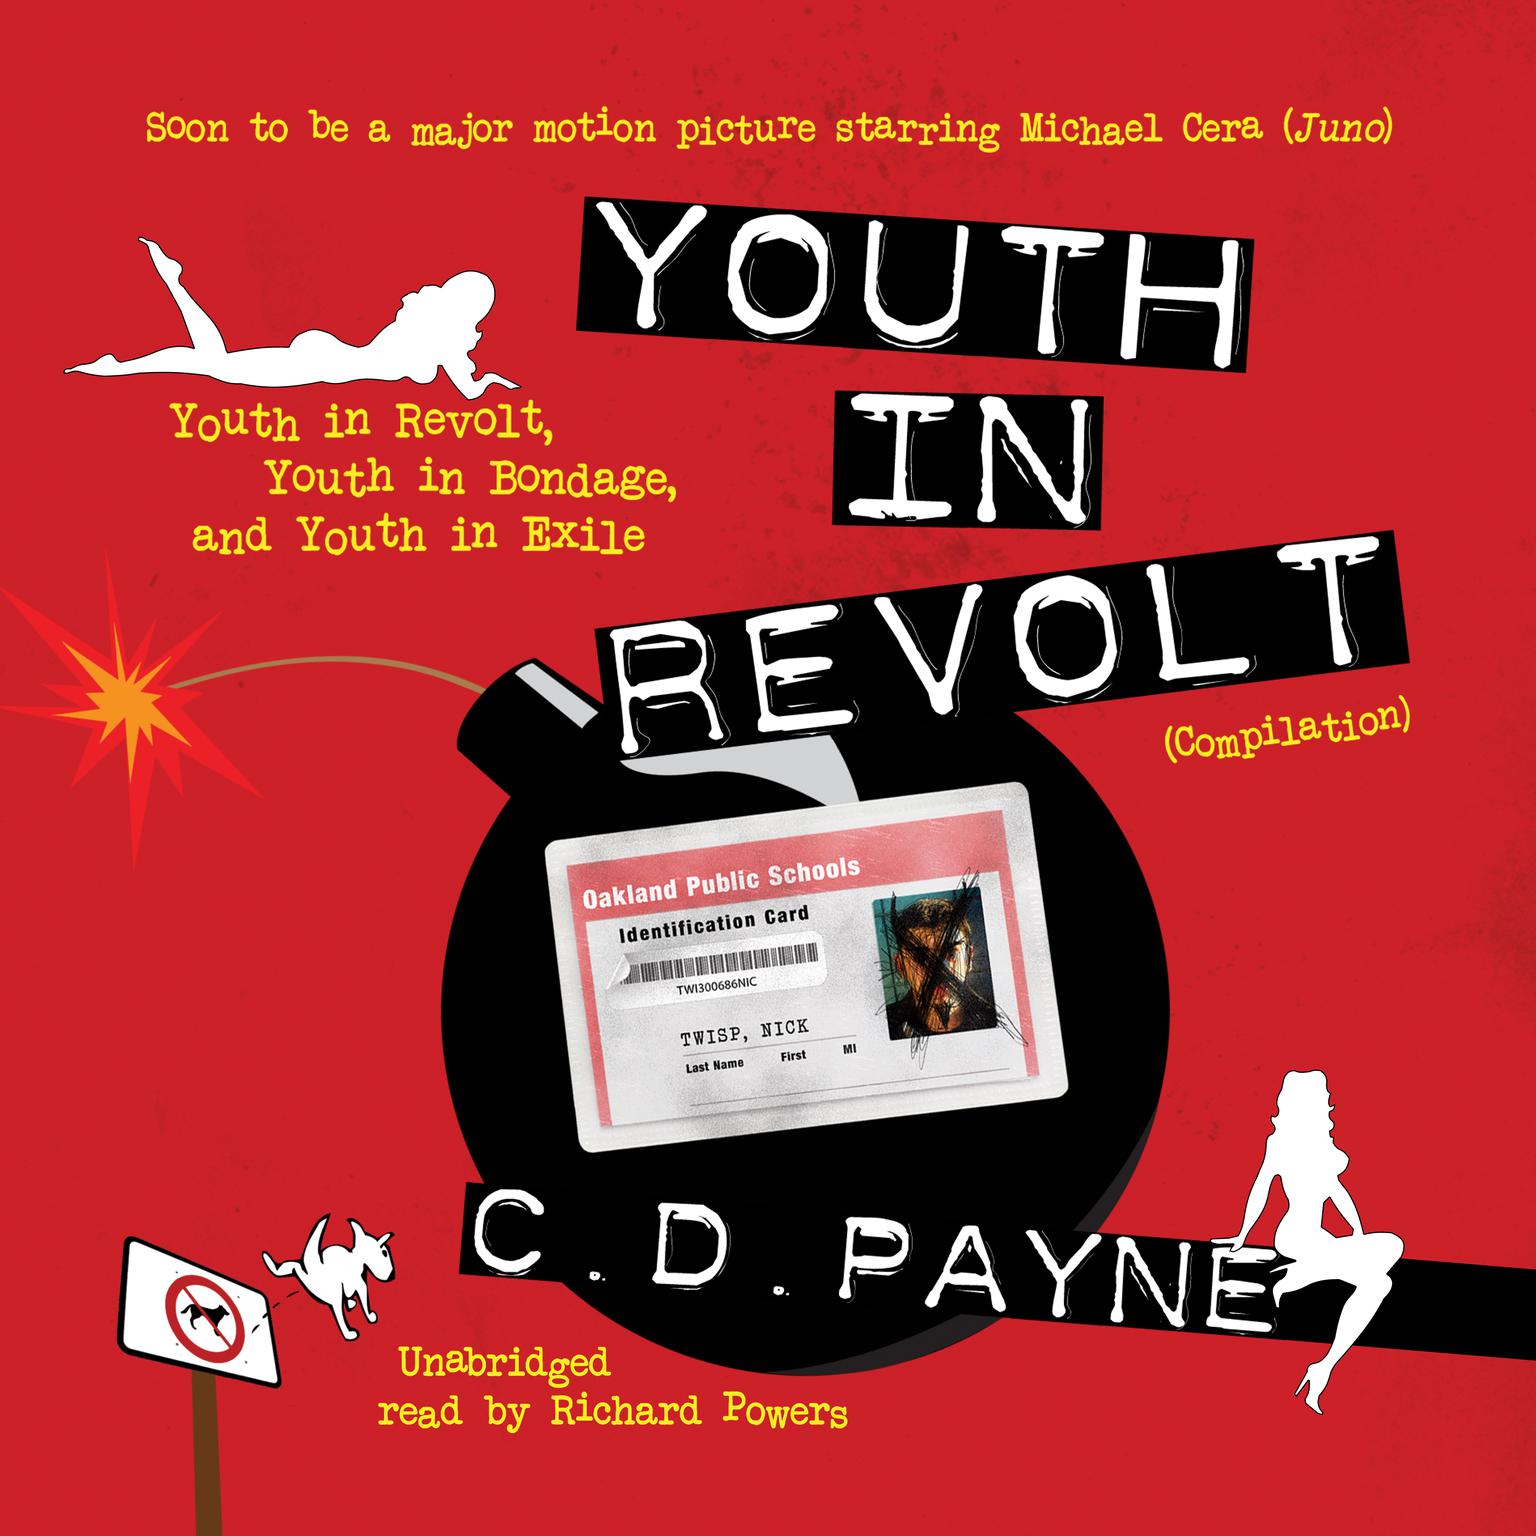 Youth in Revolt (Compilation): Youth in Revolt, Youth in Bondage, and Youth in Exile Audiobook, by C. D. Payne